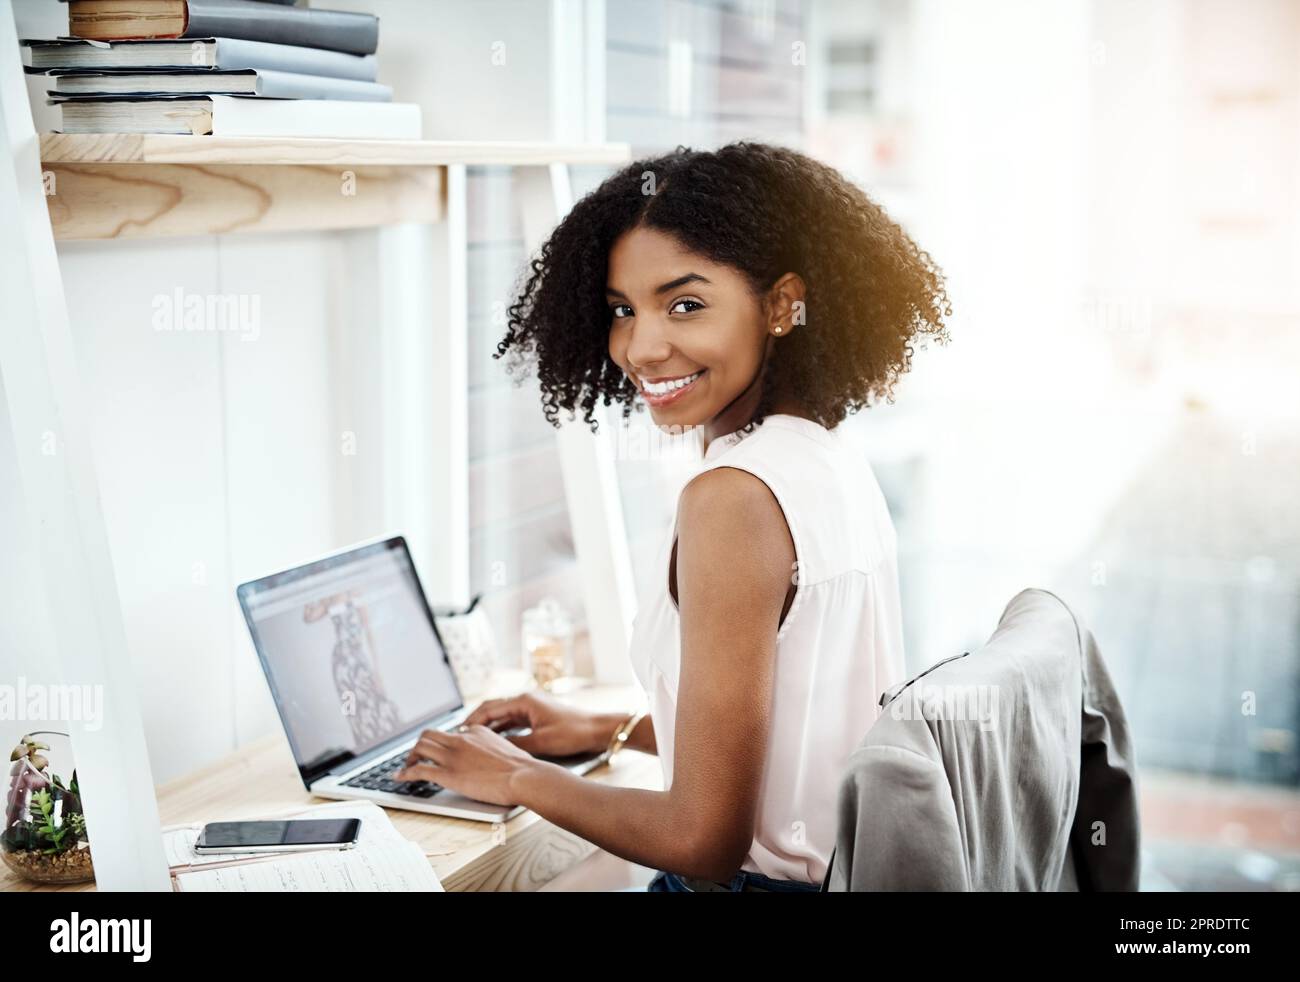 Im building something of my own. Cropped portrait of an attractive young businesswoman working on her laptop in her home office. Stock Photo